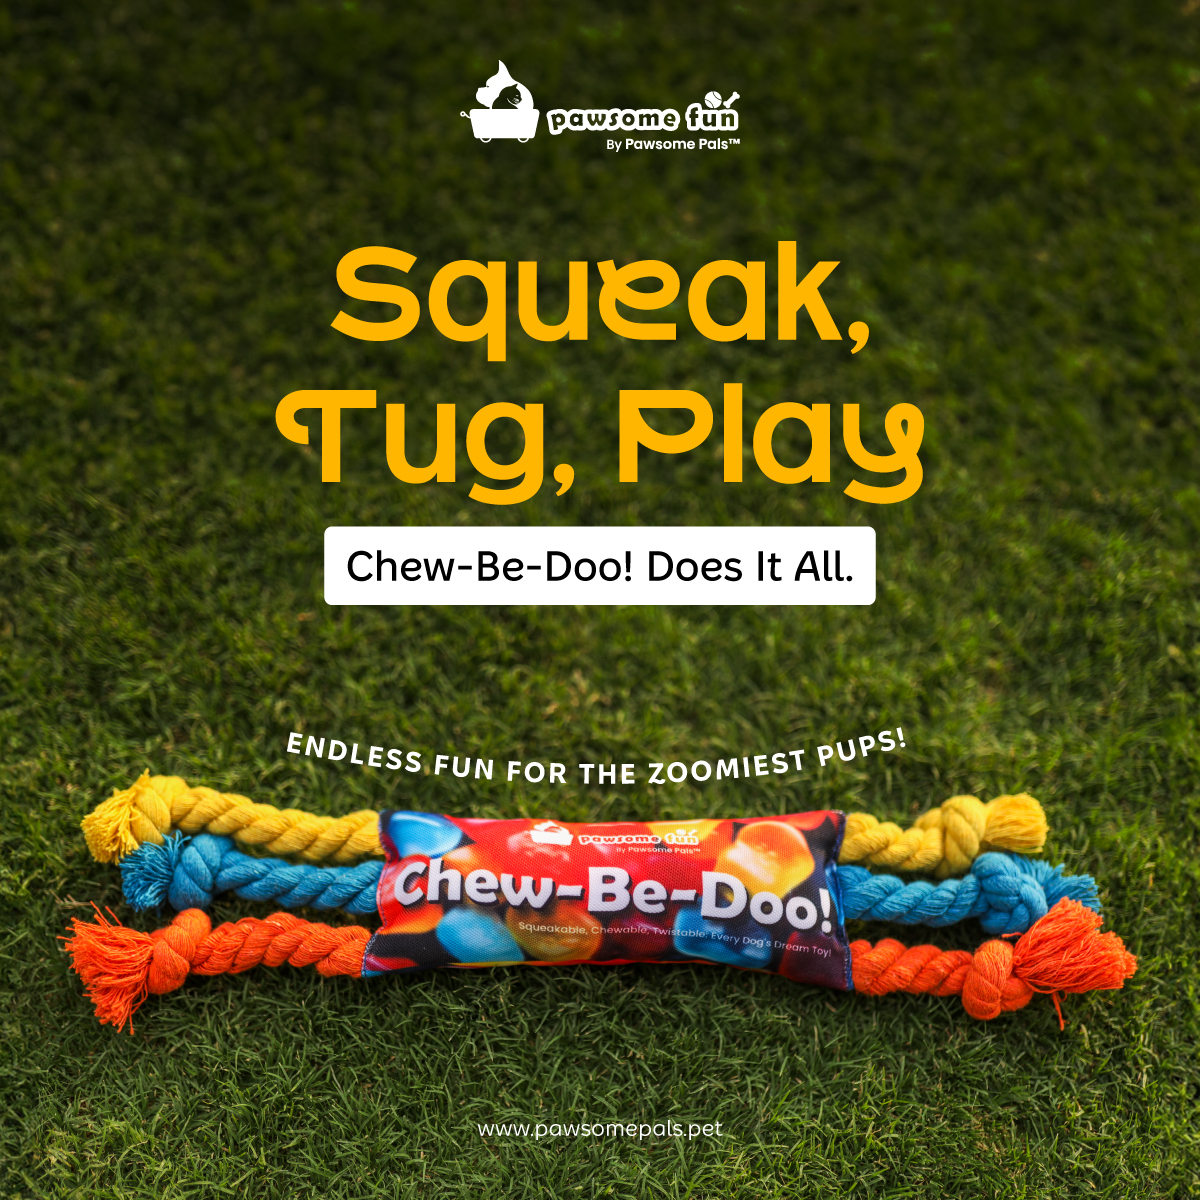 🐶 Got a playful pooch who loves a good tug and squeak? Say hello to Chew-Be-Doo!, the toy that keeps the tails wagging and the fun never-ending!

.
.
.
.
.
.
#DogToys #PetFun #TugOfFun #SqueakToyLove #PuppyPlaytime
#DogsOfInstagram #JoyfulPets #PlayfulPups #pawsomepals